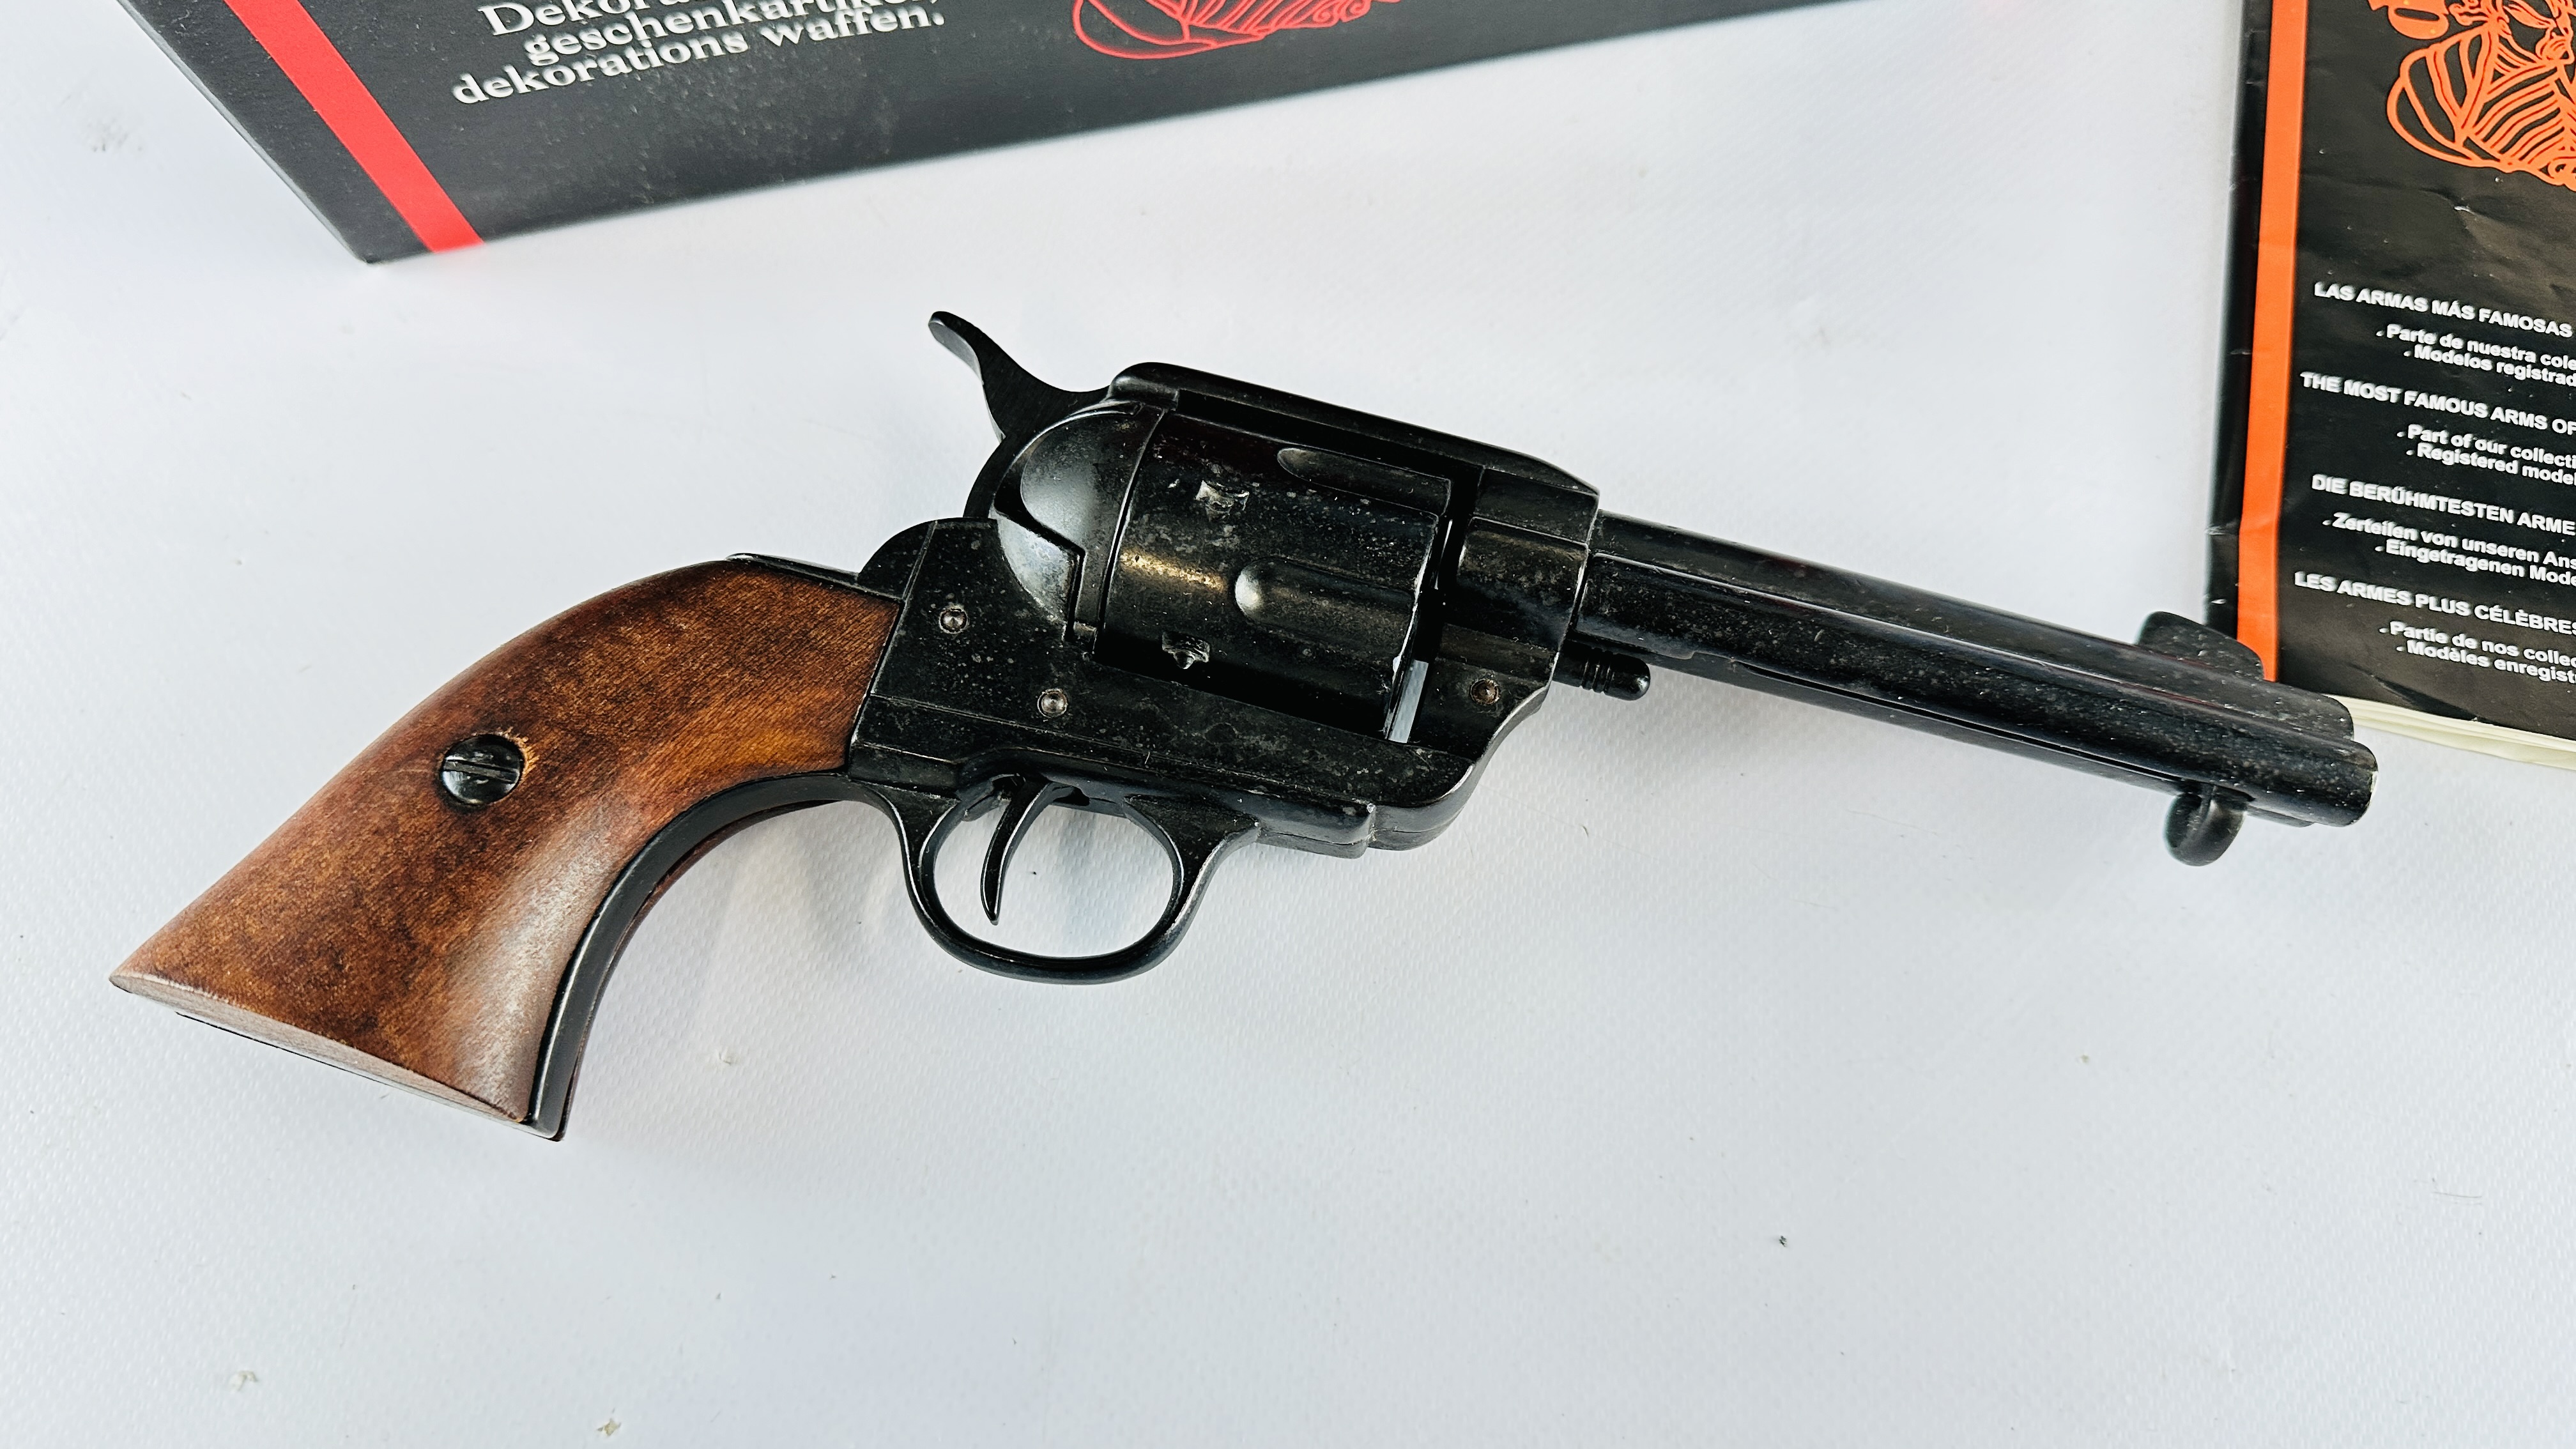 A REPLICA 6 SHOT REVOLVER IN DENIX BOX - SOLD AS SEEN - NO POSTAGE OR PACKING. - Image 2 of 5